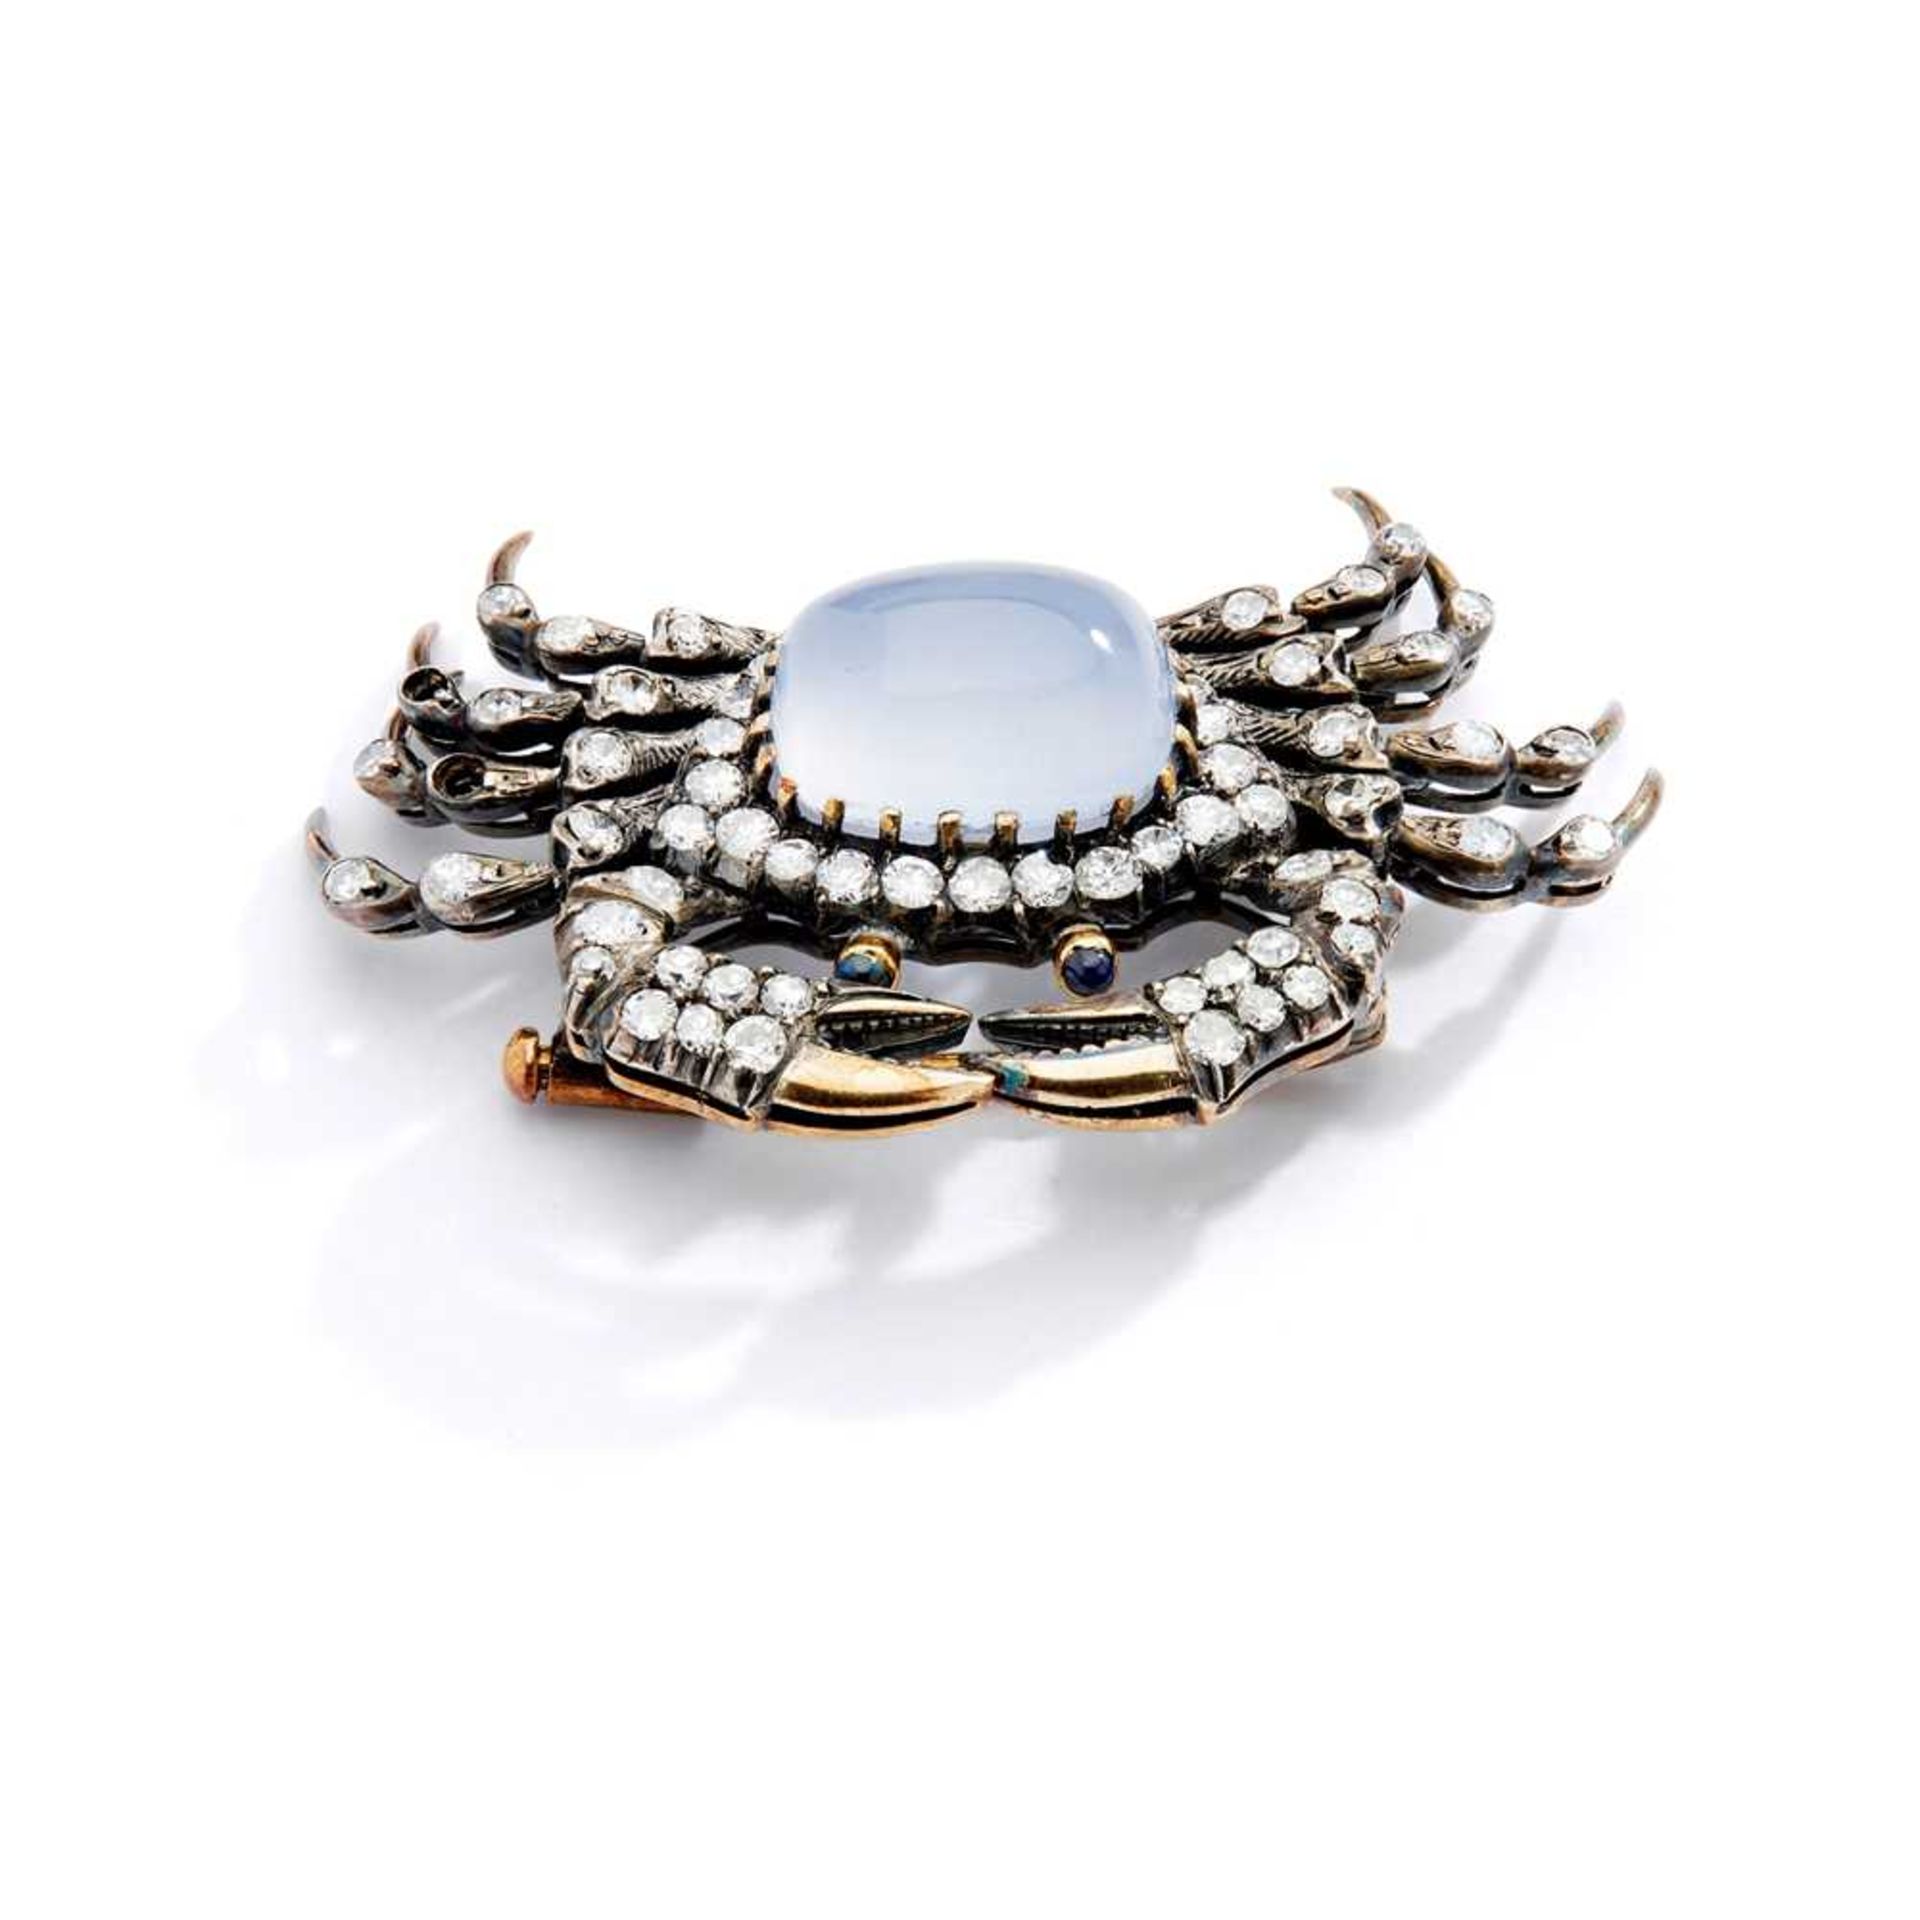 A chalcedony and diamond crab brooch - Image 2 of 6